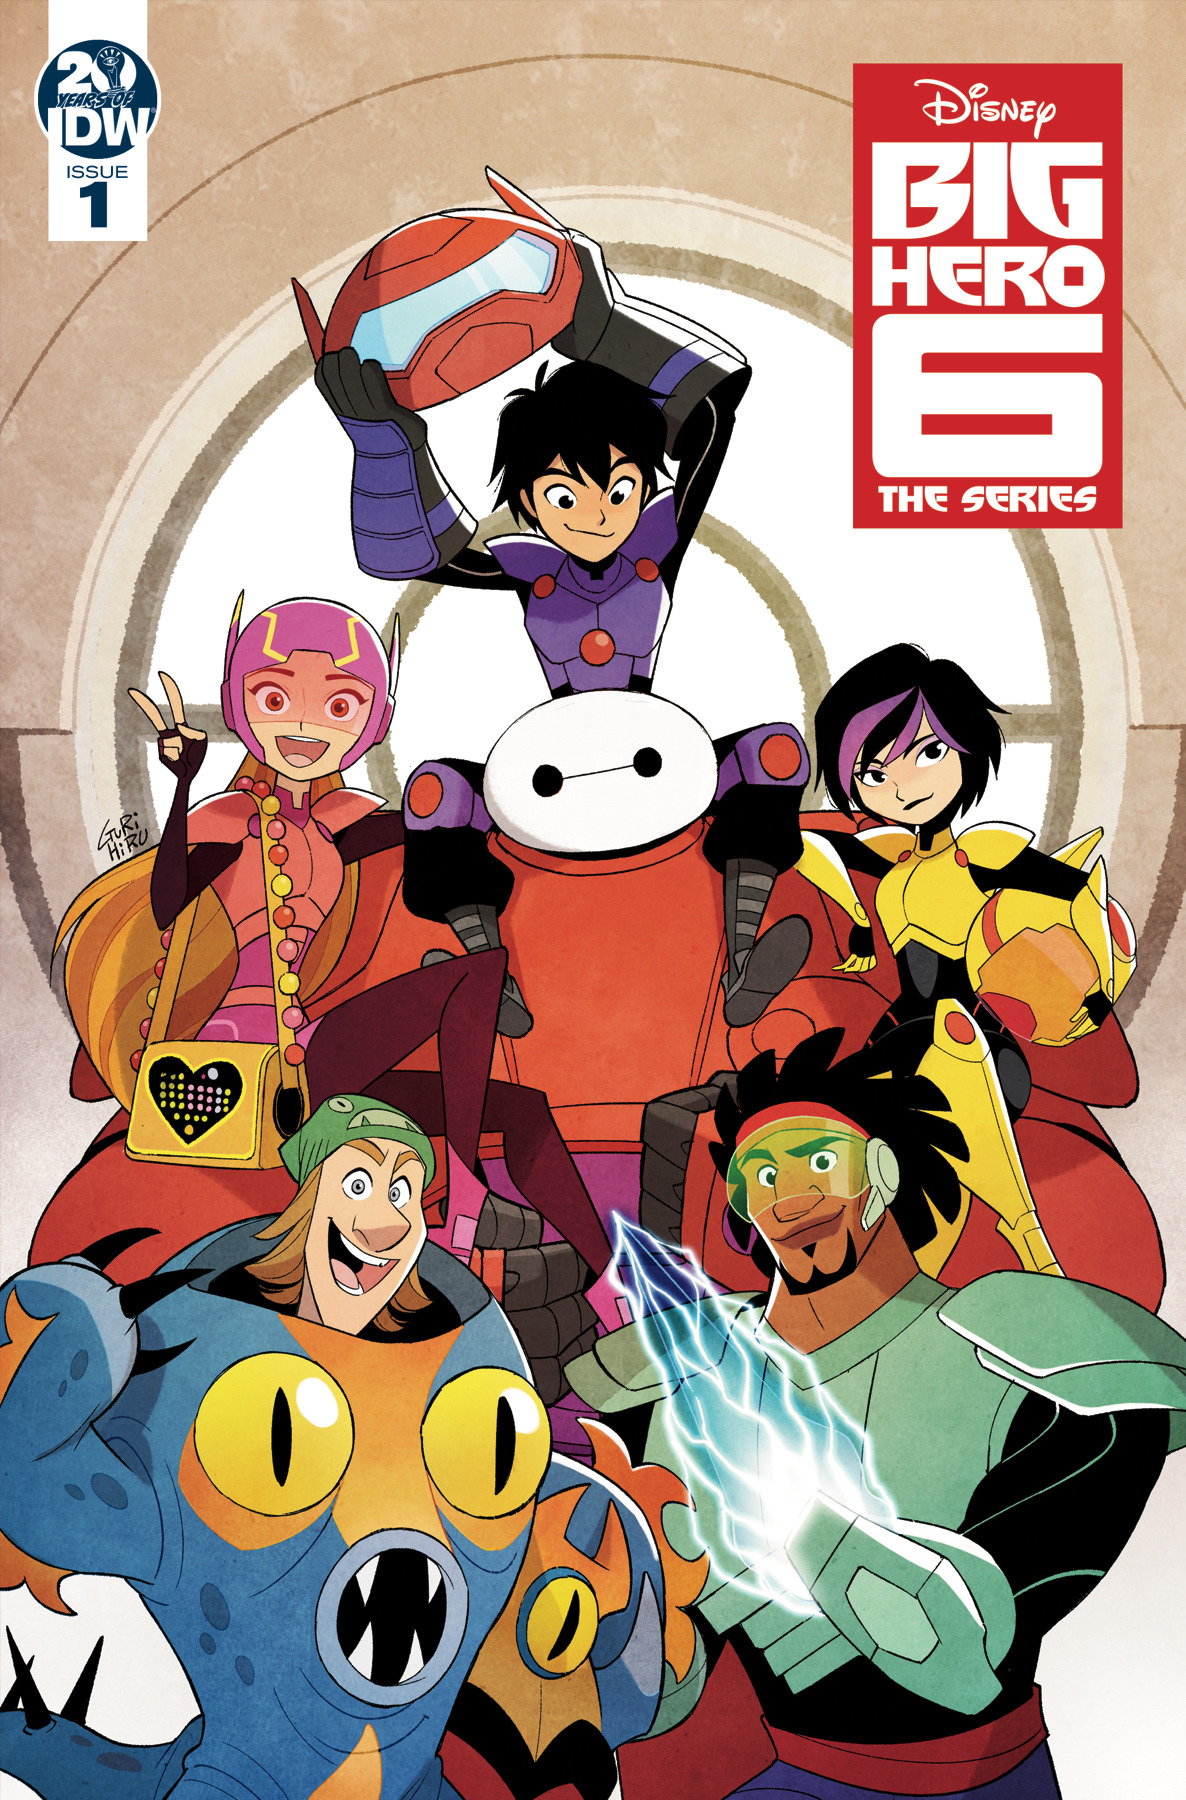 Walt Disney Television Animation News — After many months of delay Big Hero  6 The Series...